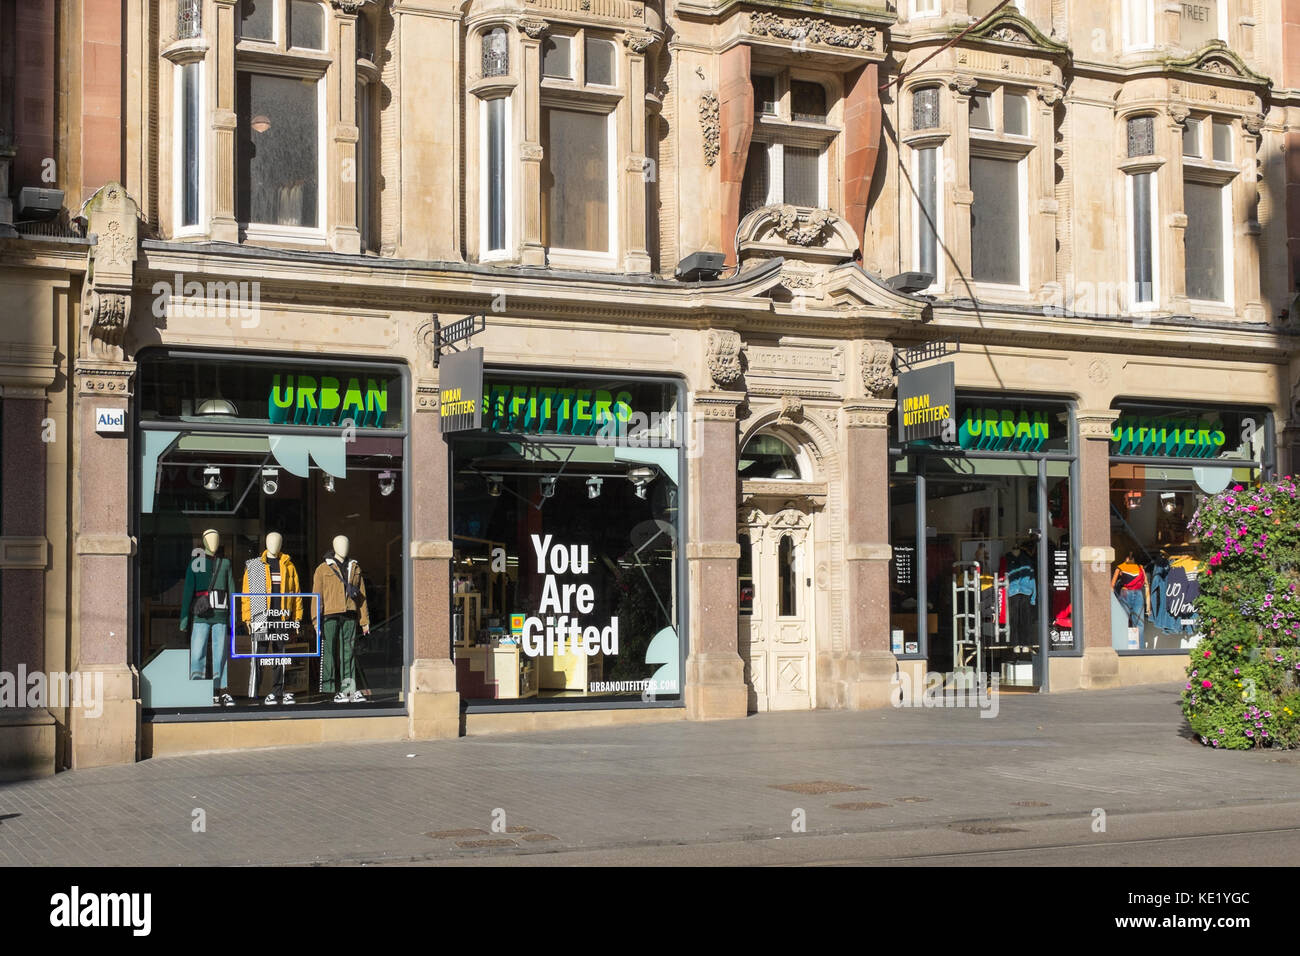 Urban Outfitters shop front in Corporation Street, Birmingham, UK Stock Photo